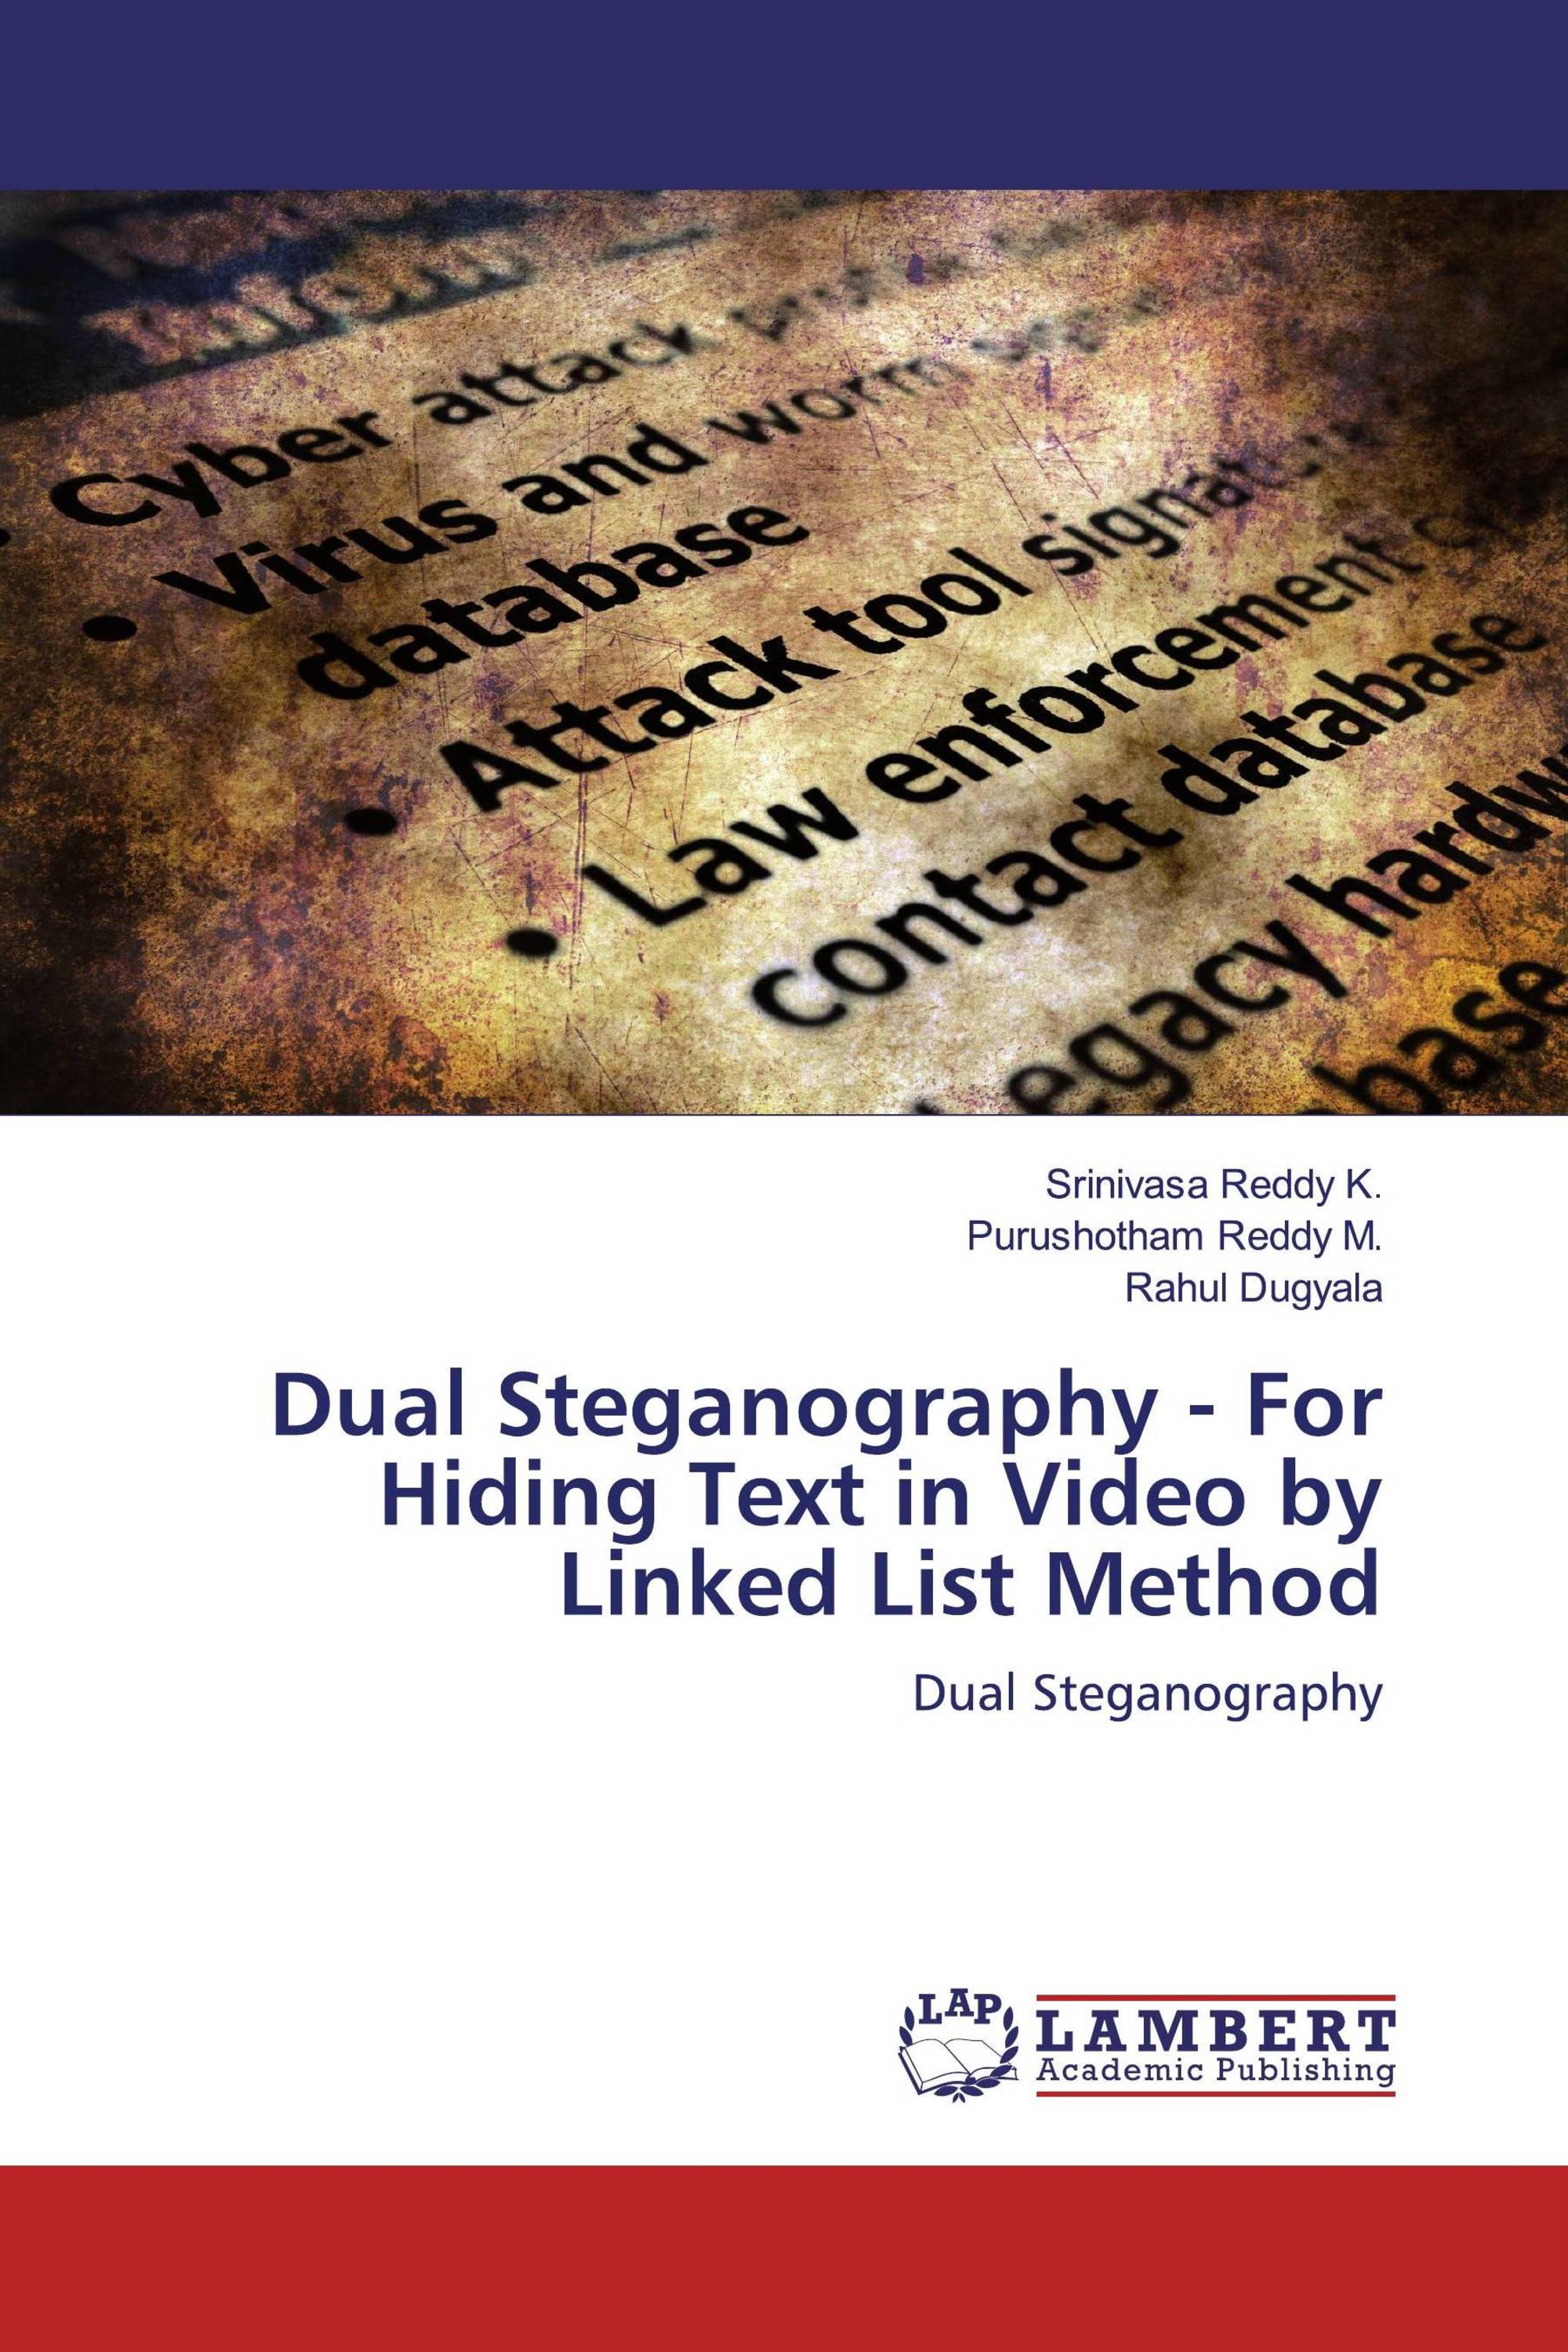 Dual Steganography For Hiding Text in Video by Linked List Method